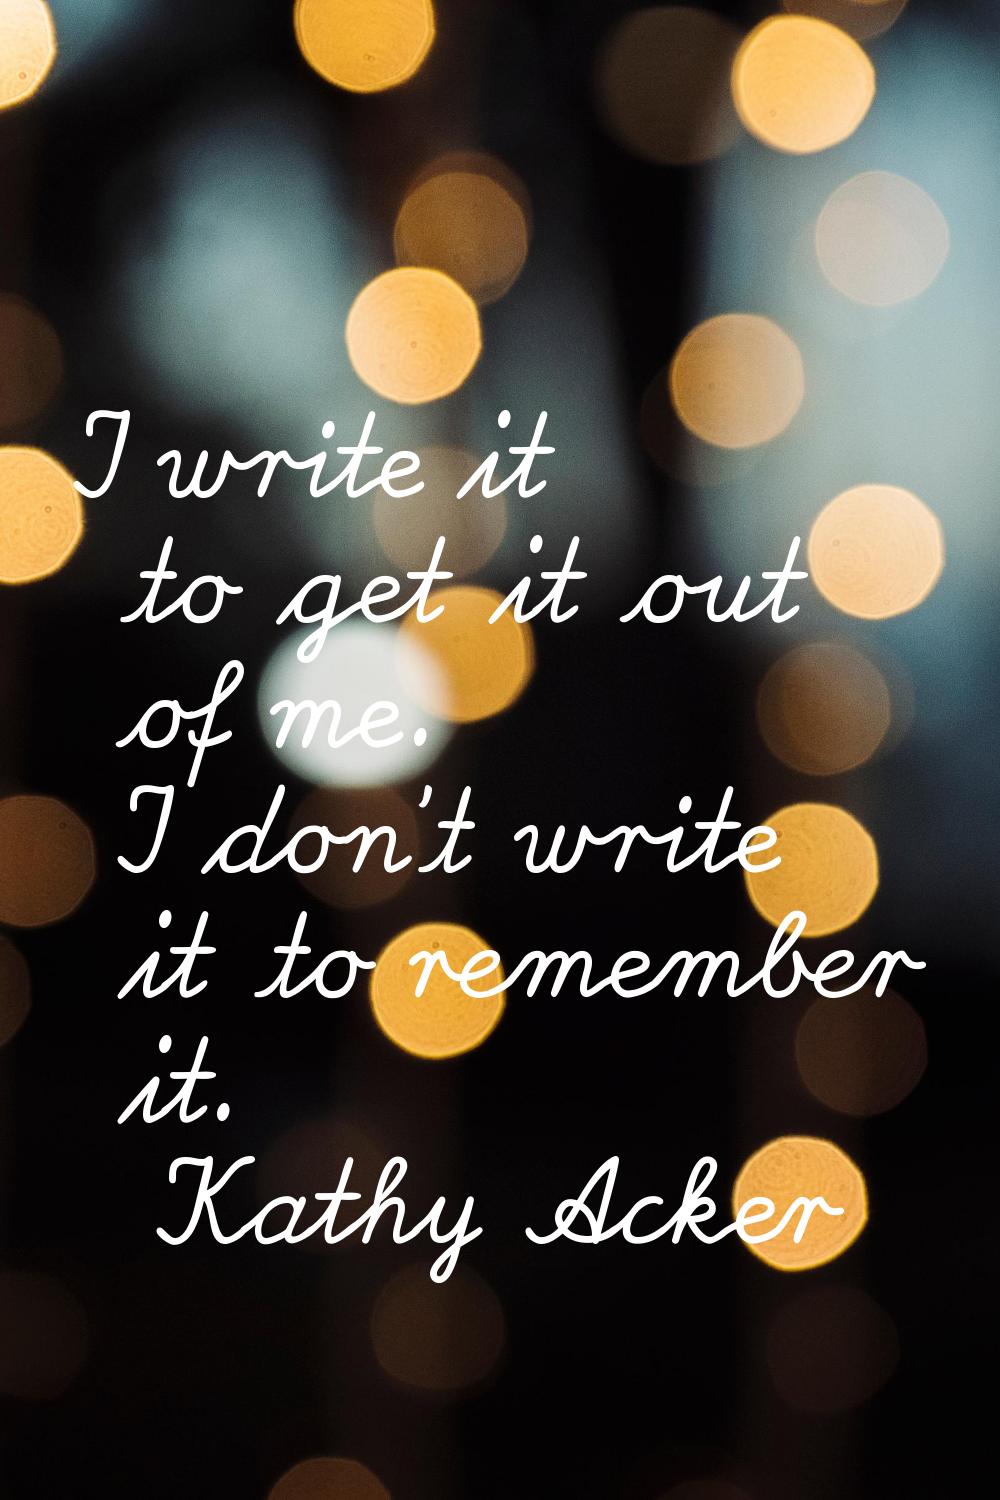 I write it to get it out of me. I don't write it to remember it.